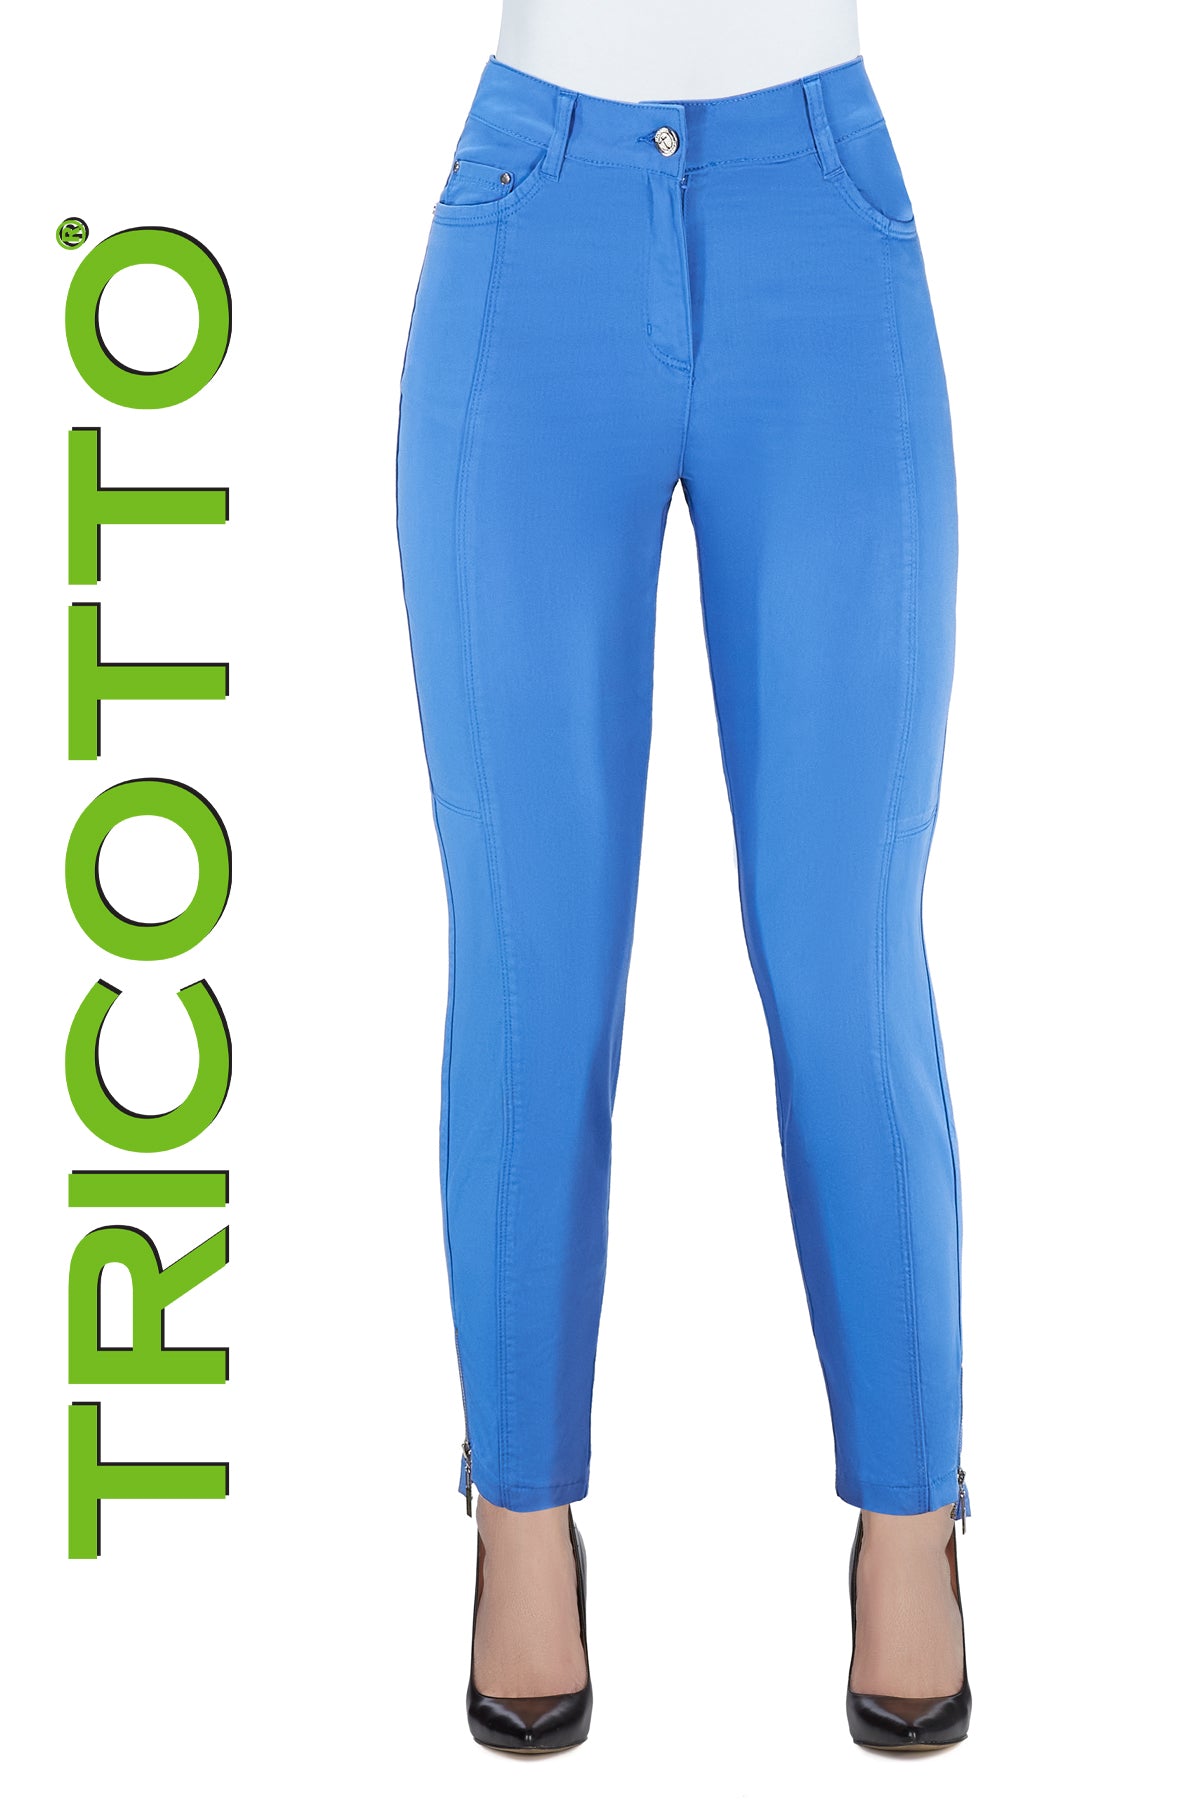 Tricotto Blue pants with zip front, belt loops and zipper hem detail